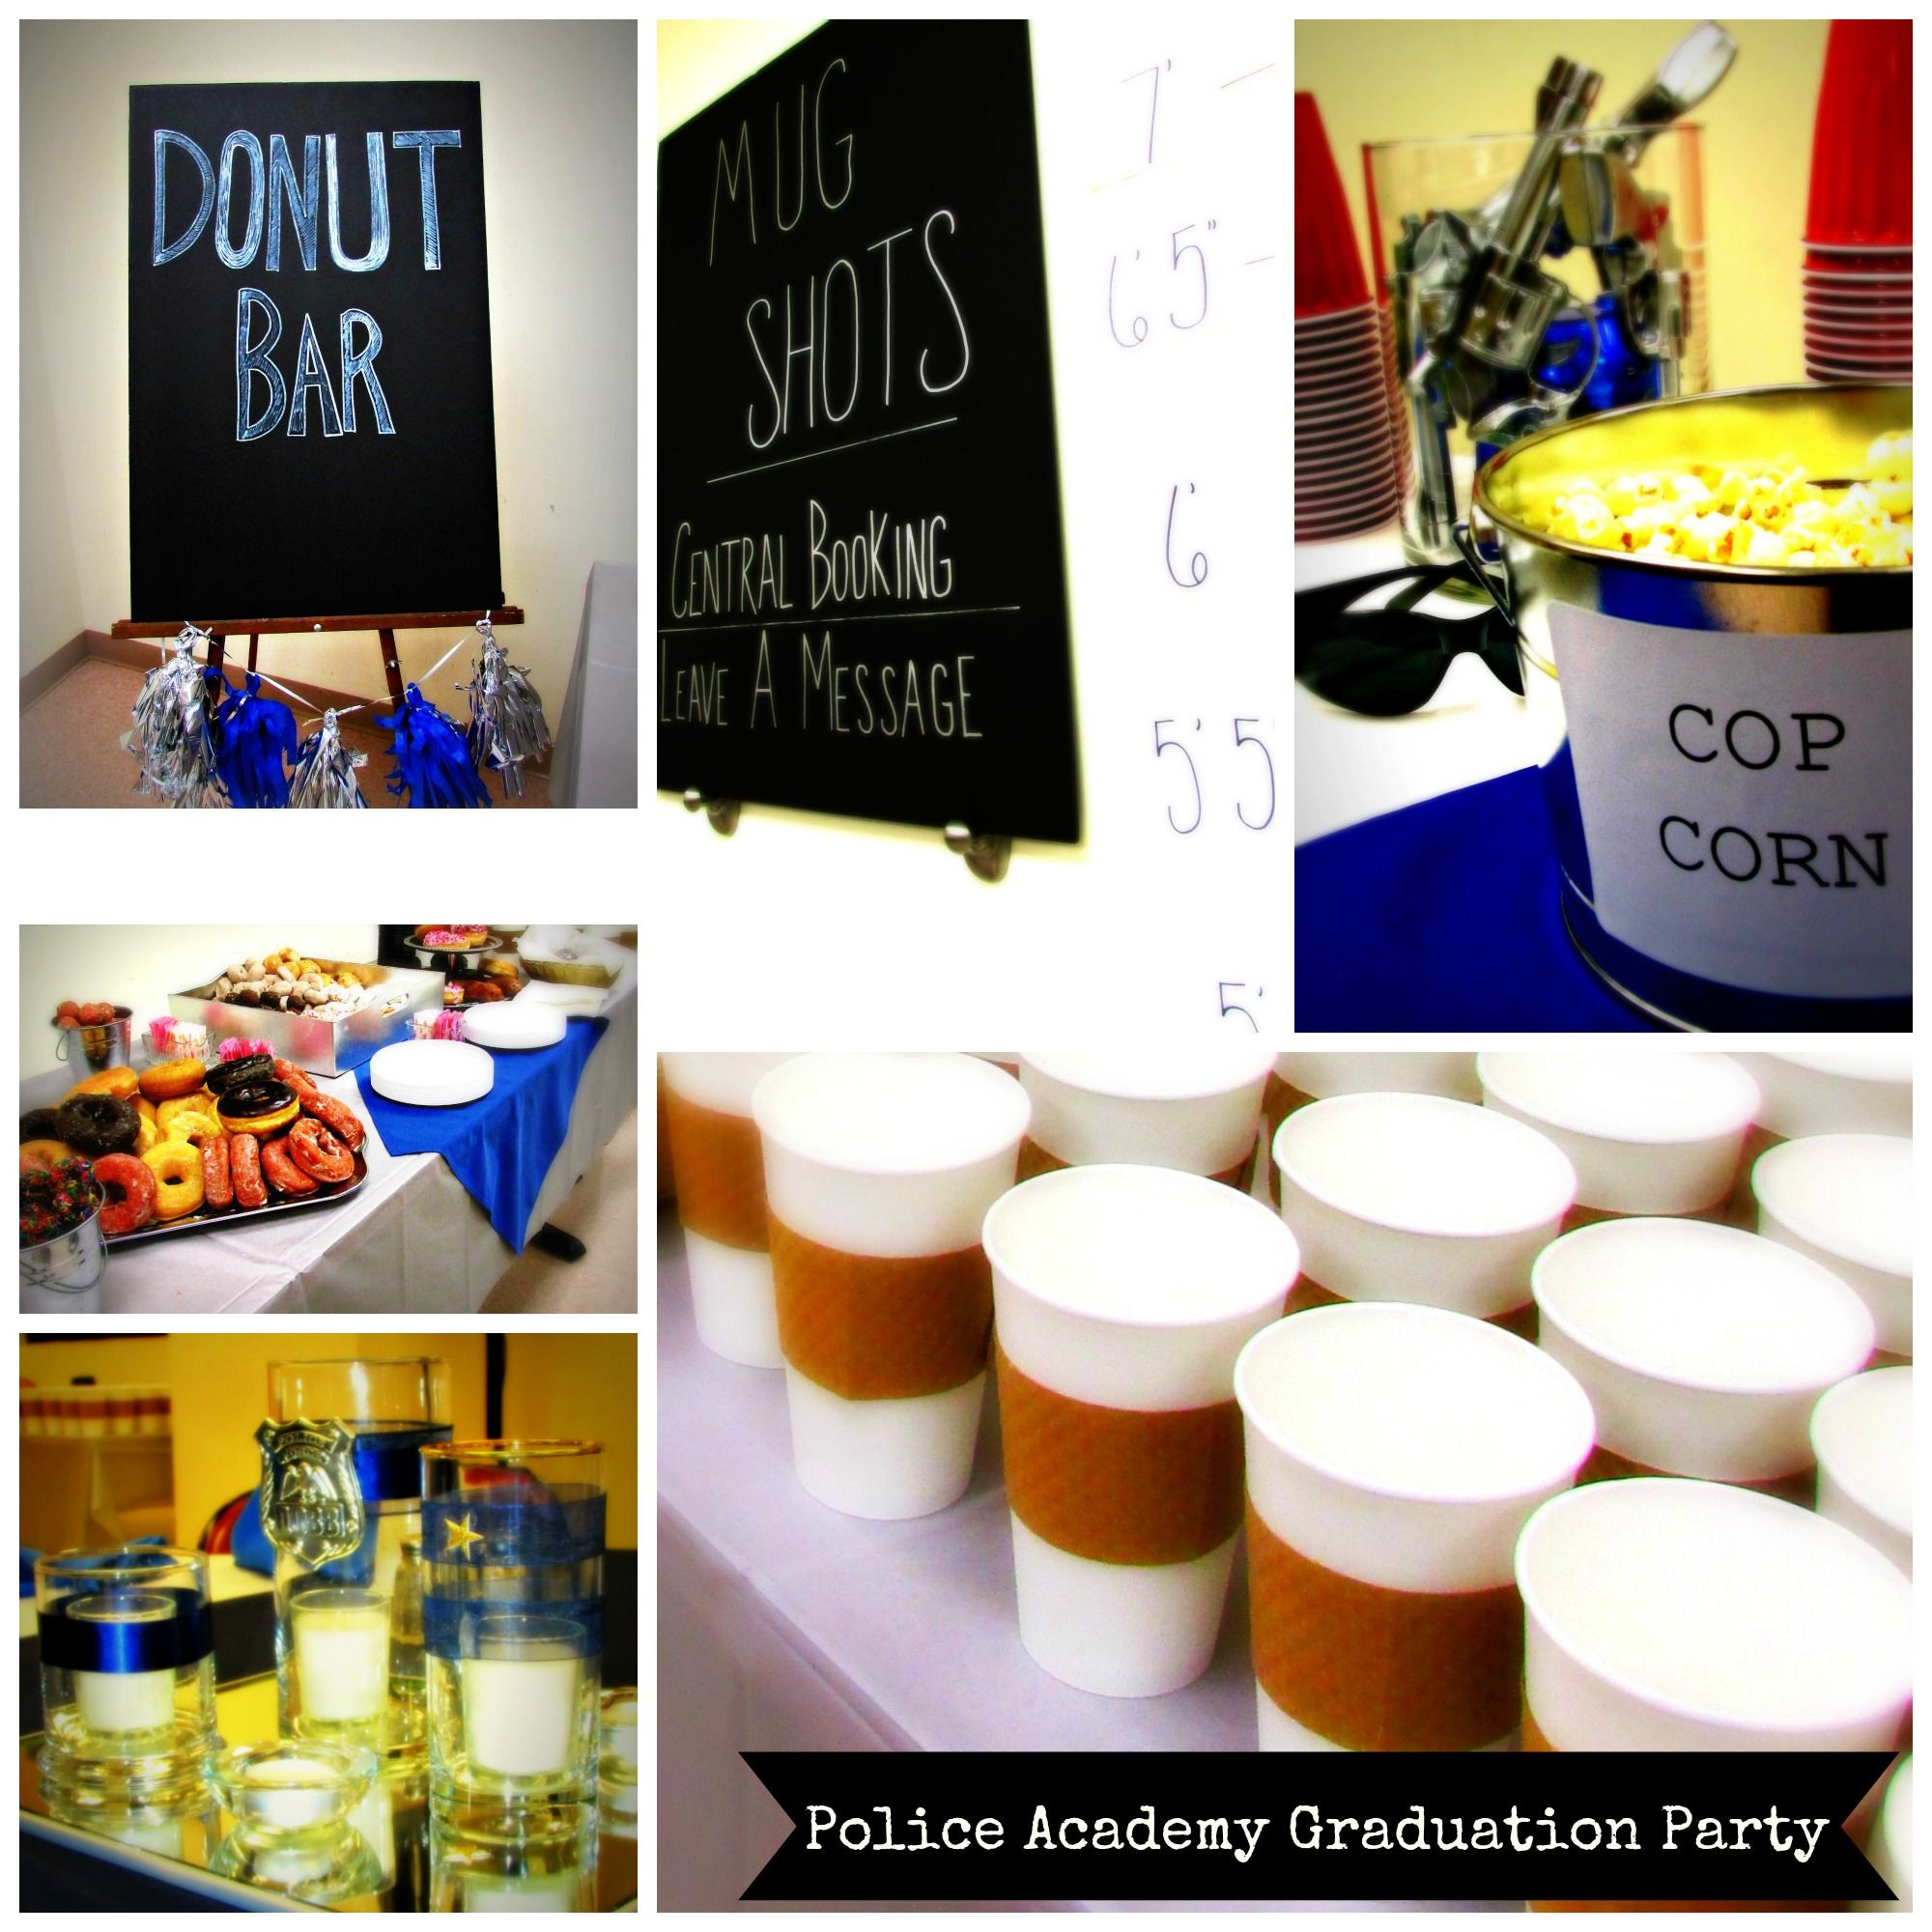 Police Academy Graduation Party Ideas
 Pin by KayLee Wood on party ideas